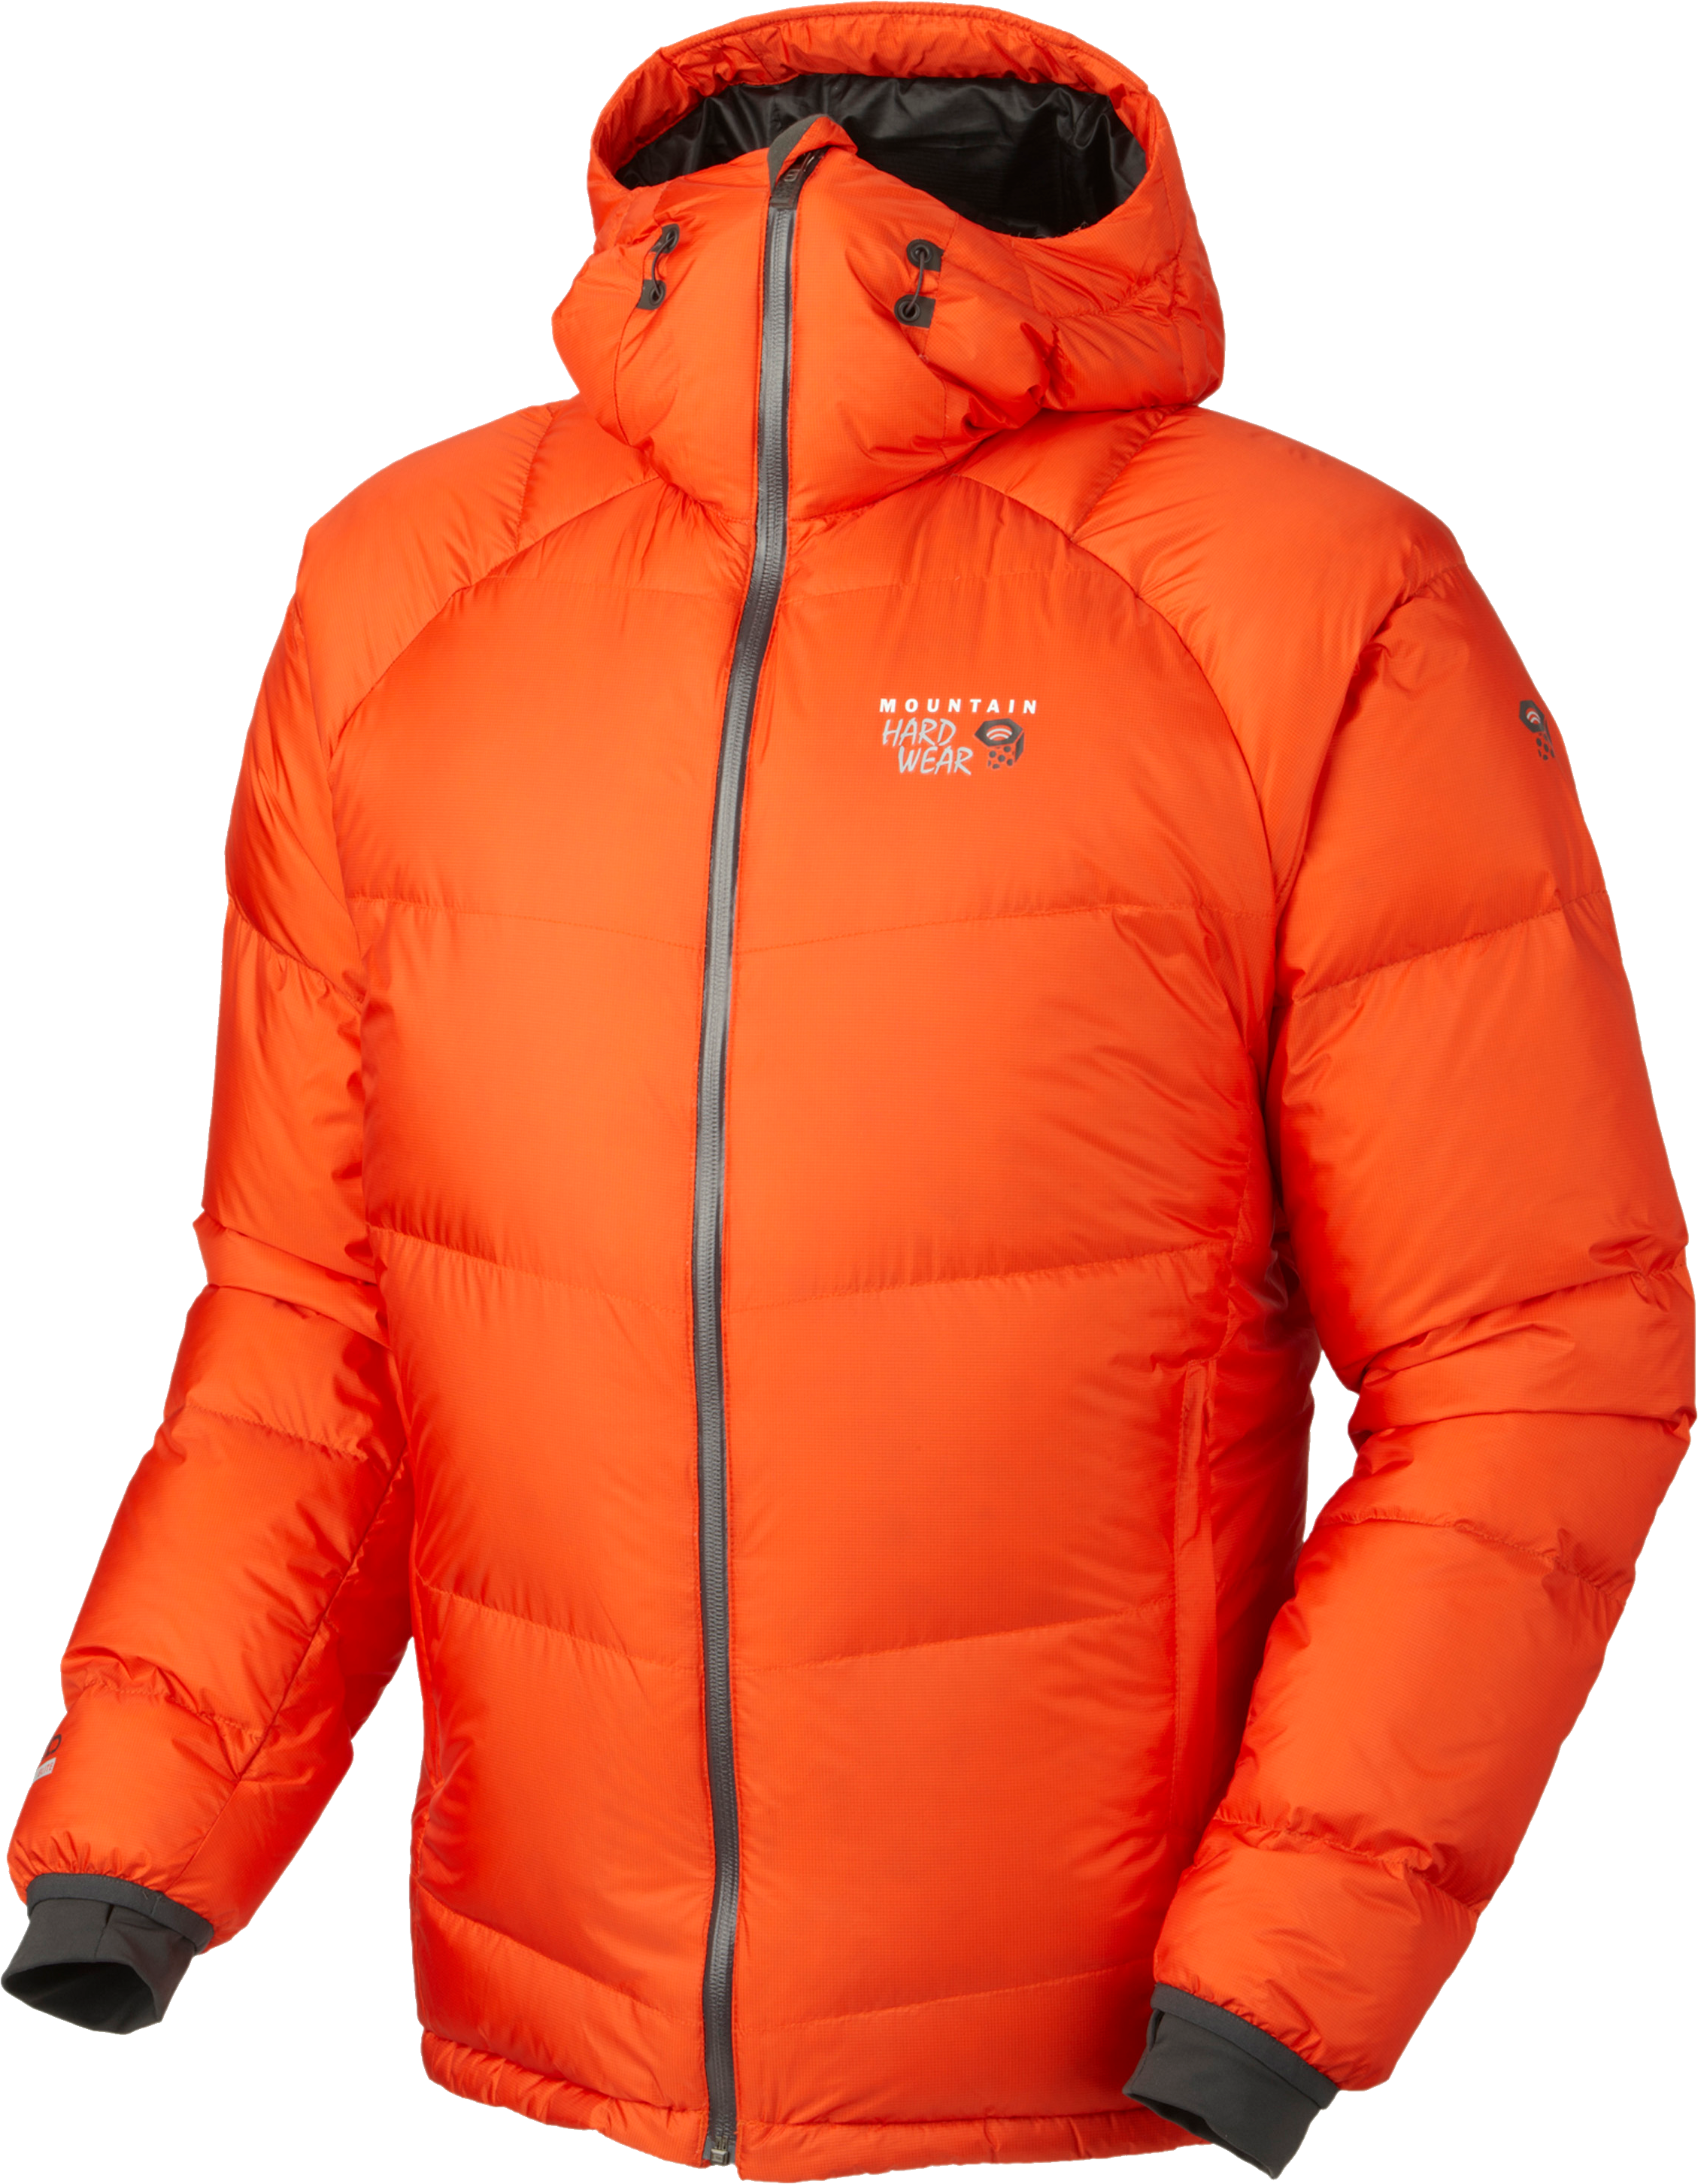 A Orange Puffer Jacket With A Black Background